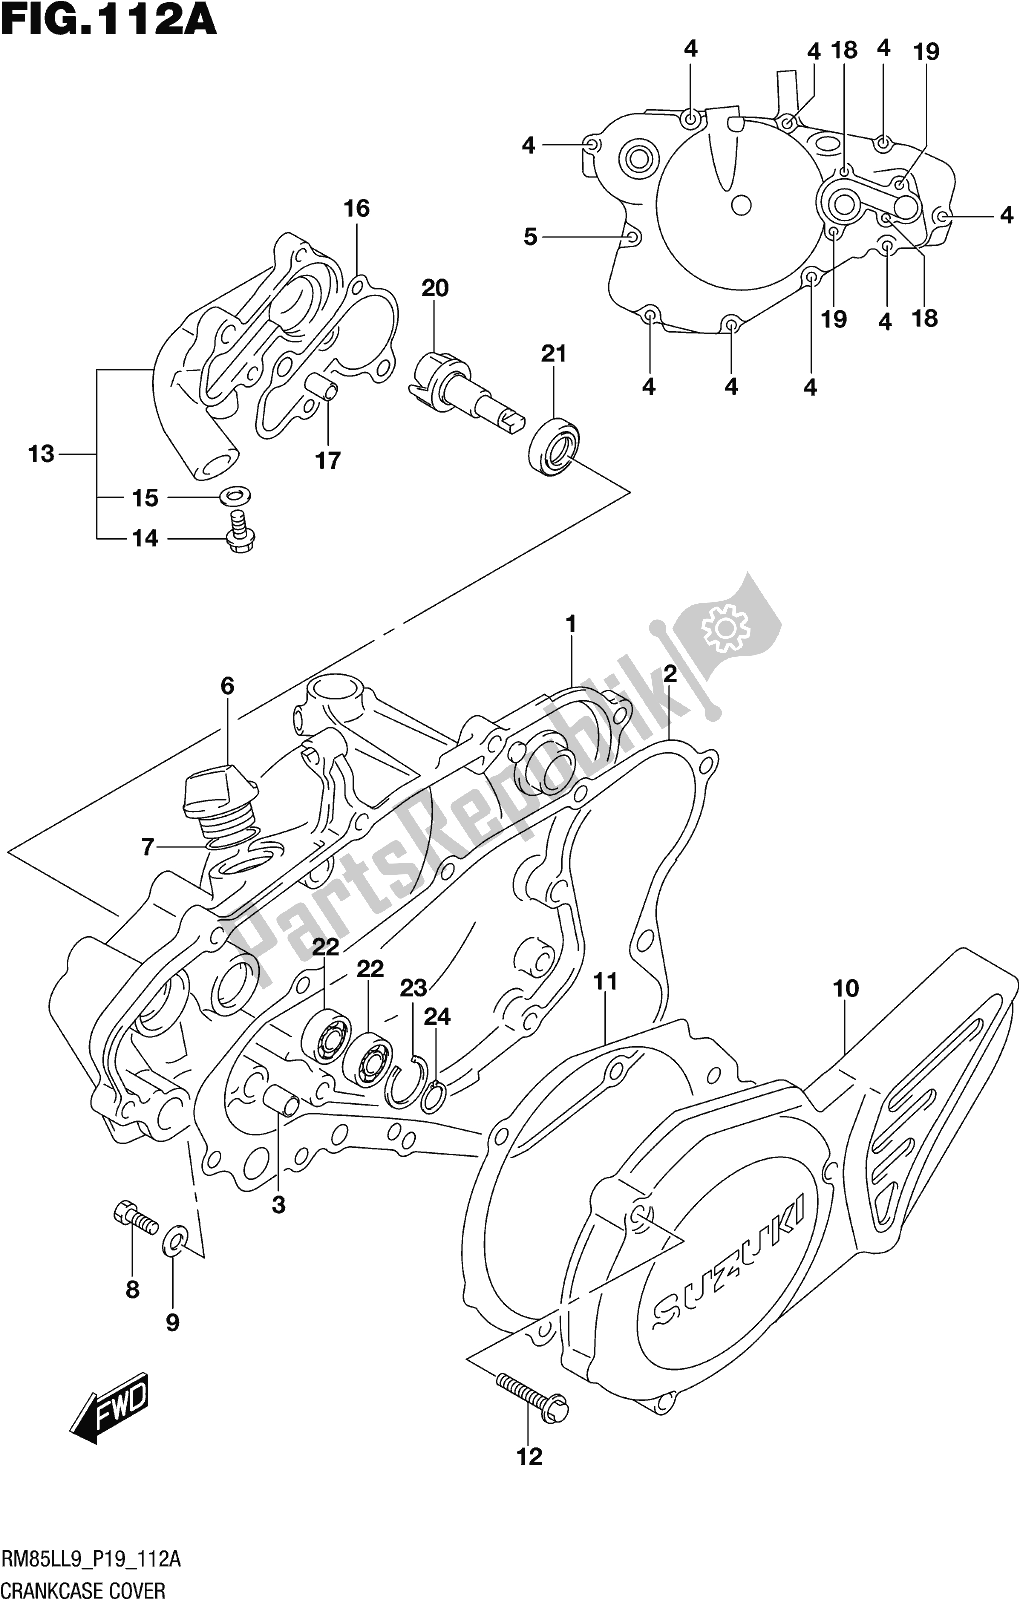 All parts for the Fig. 112a Crankcase Cover of the Suzuki RM 85L 2019